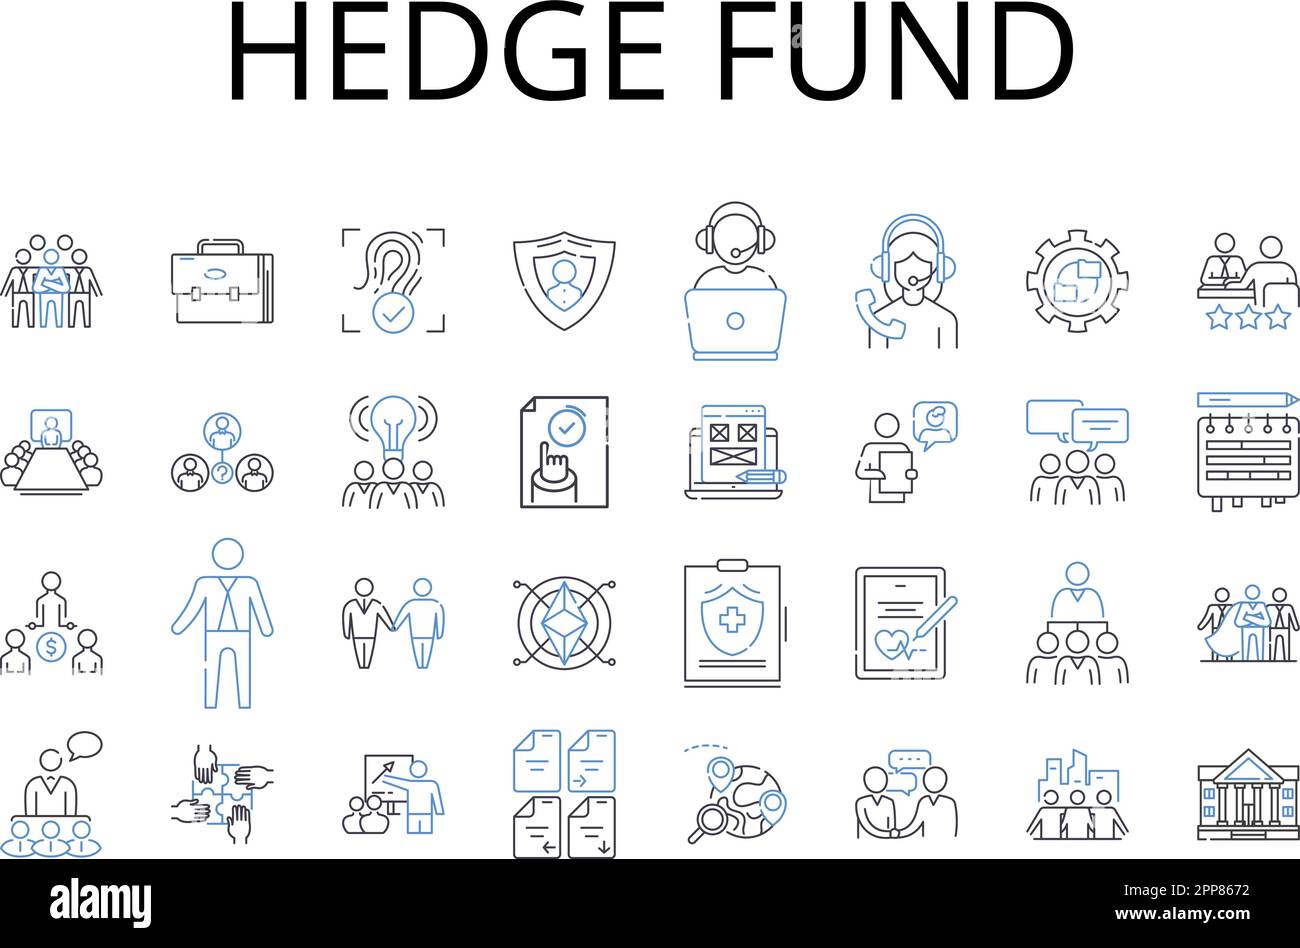 Hedge fund line icons collection. Wealth management, Investment vehicle, Venture capital, Angel investing, Mutual fund, Private equity, Asset Stock Vector